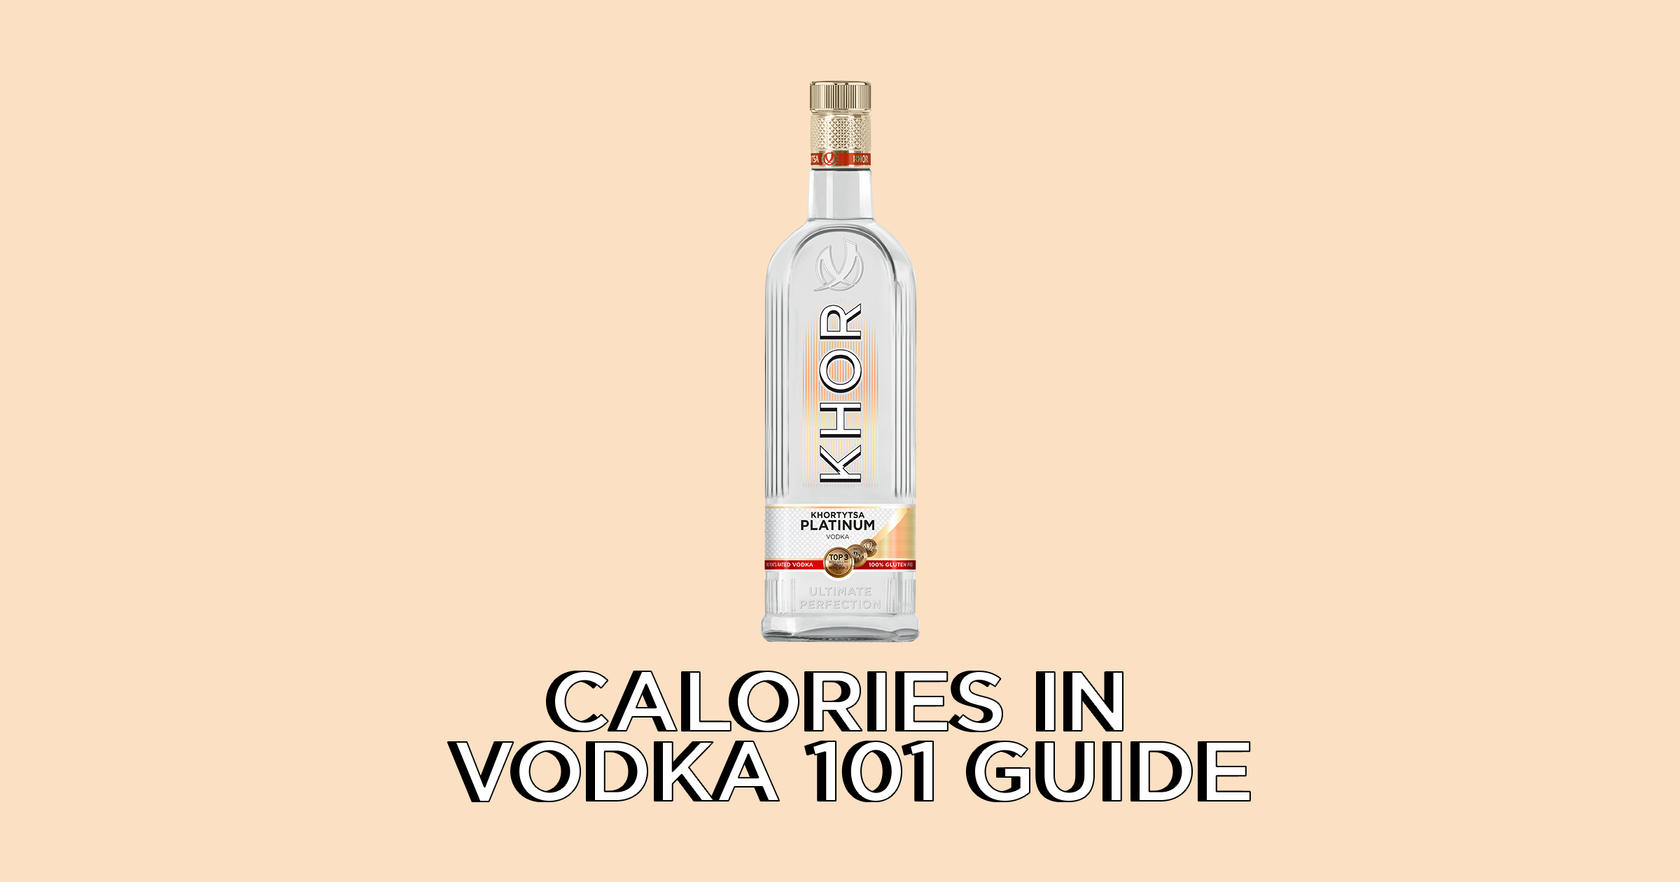 Calories in vodka: Calories, carbs, and nutrition facts